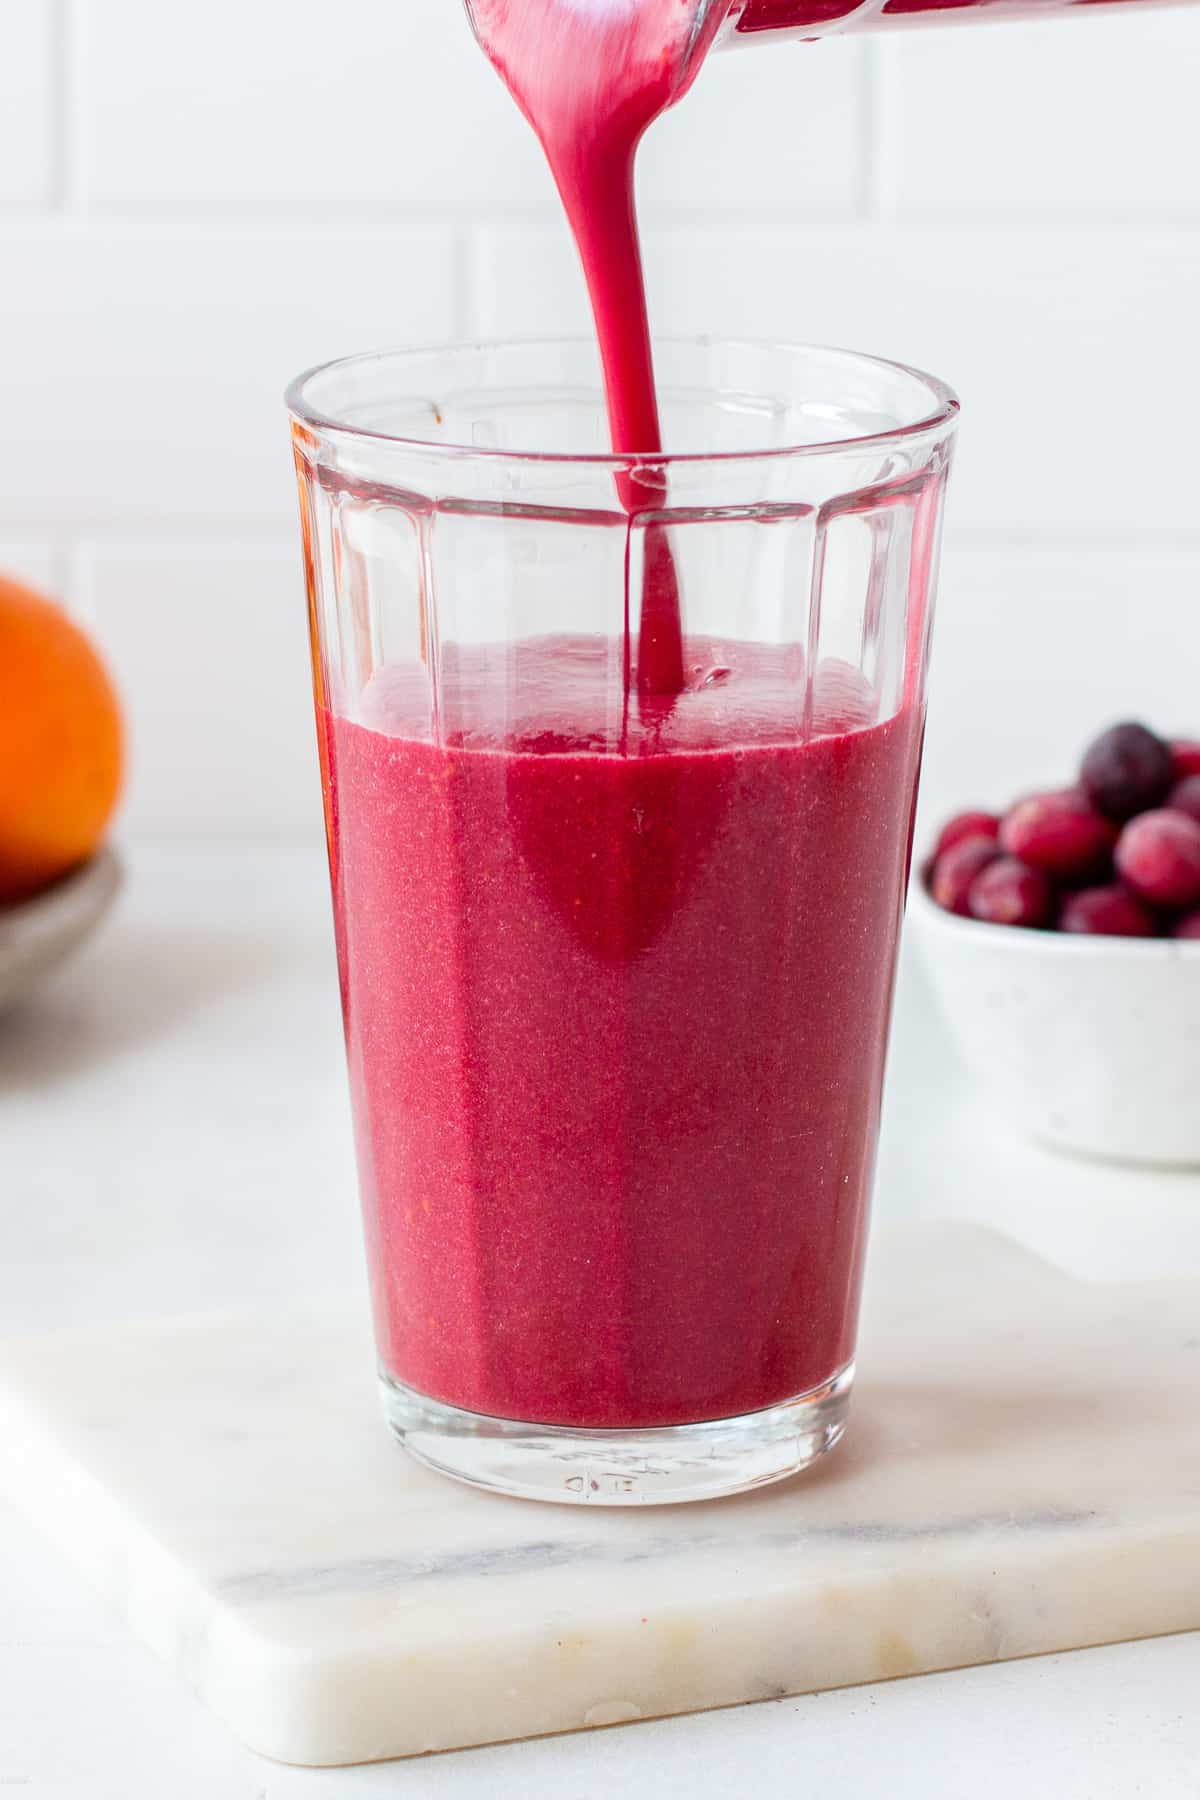 Blender pouring a bright pink smoothie in a tall glass.